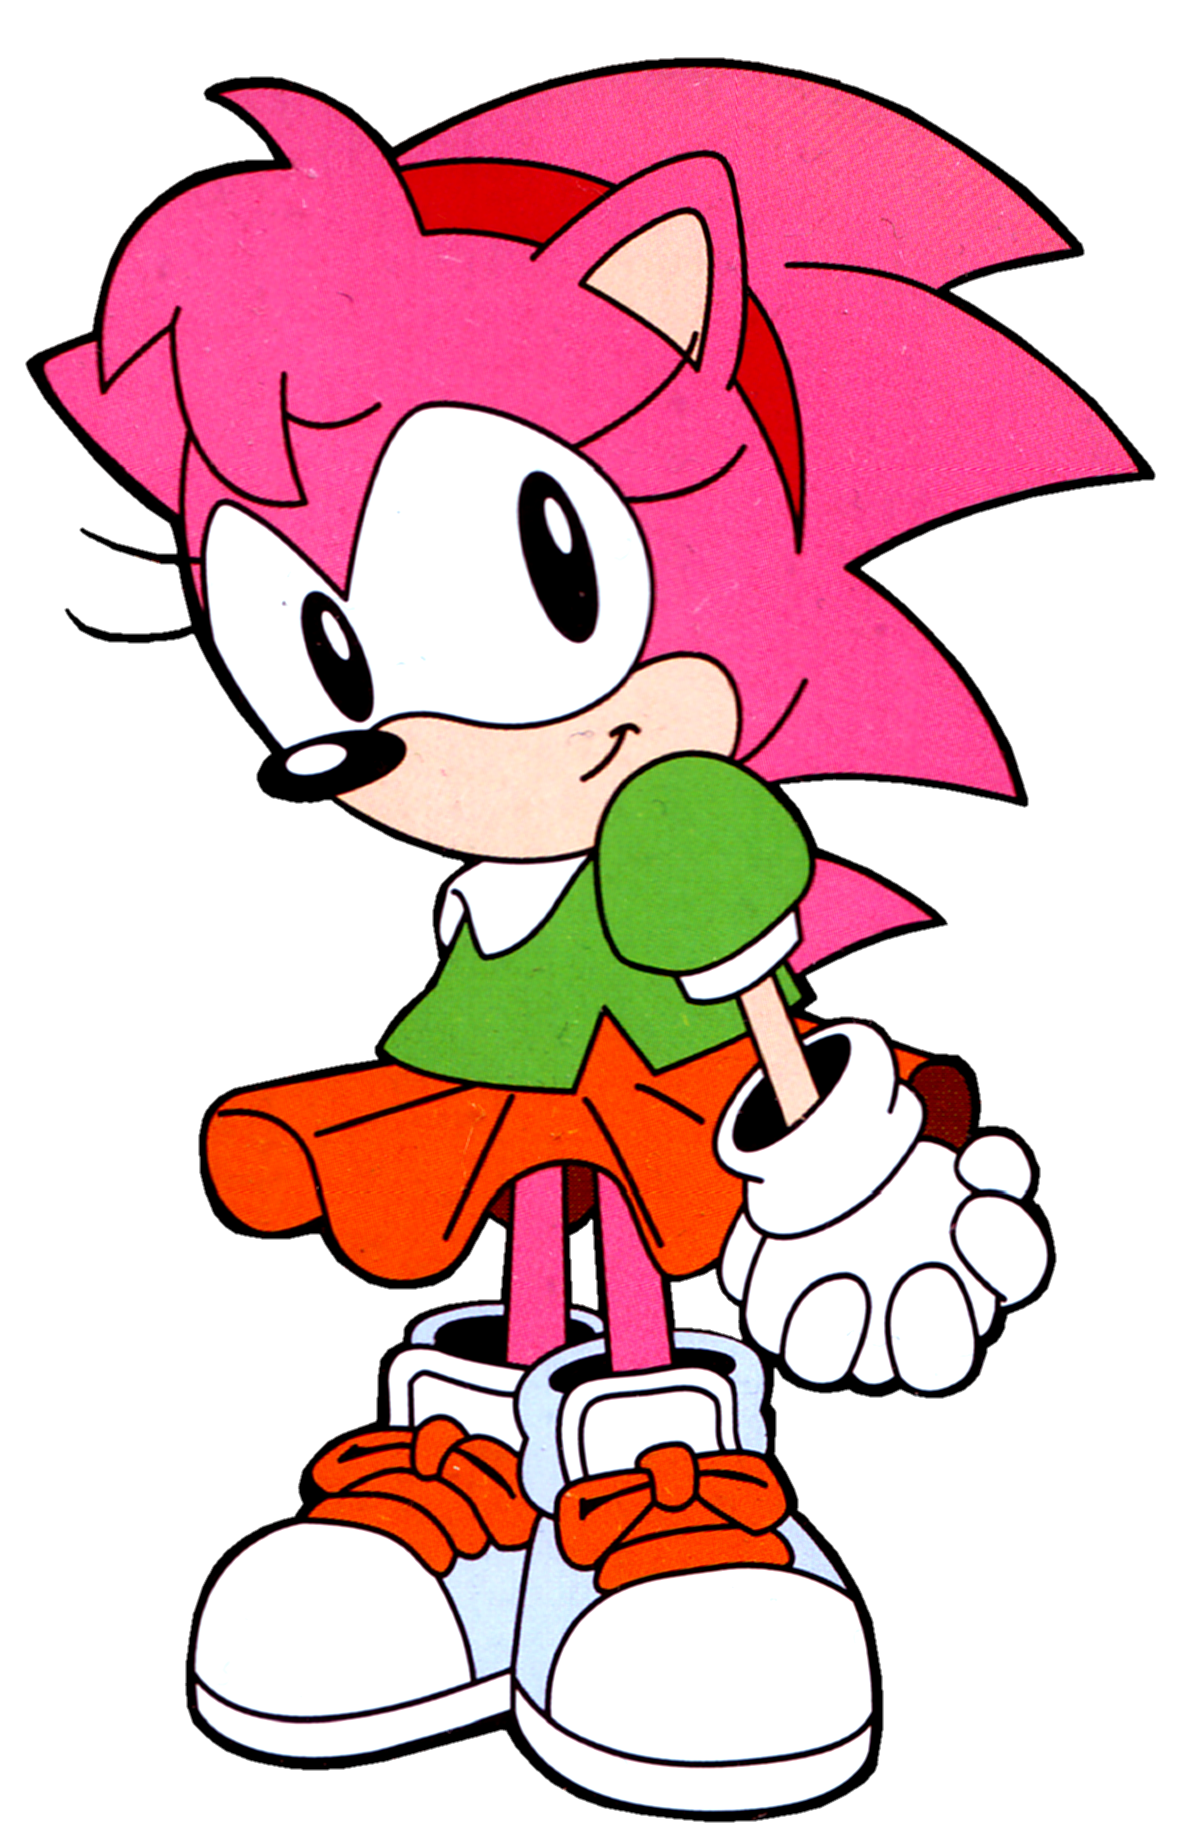 Amy Rose in Sonic the Hedgehog - Sonic Retro